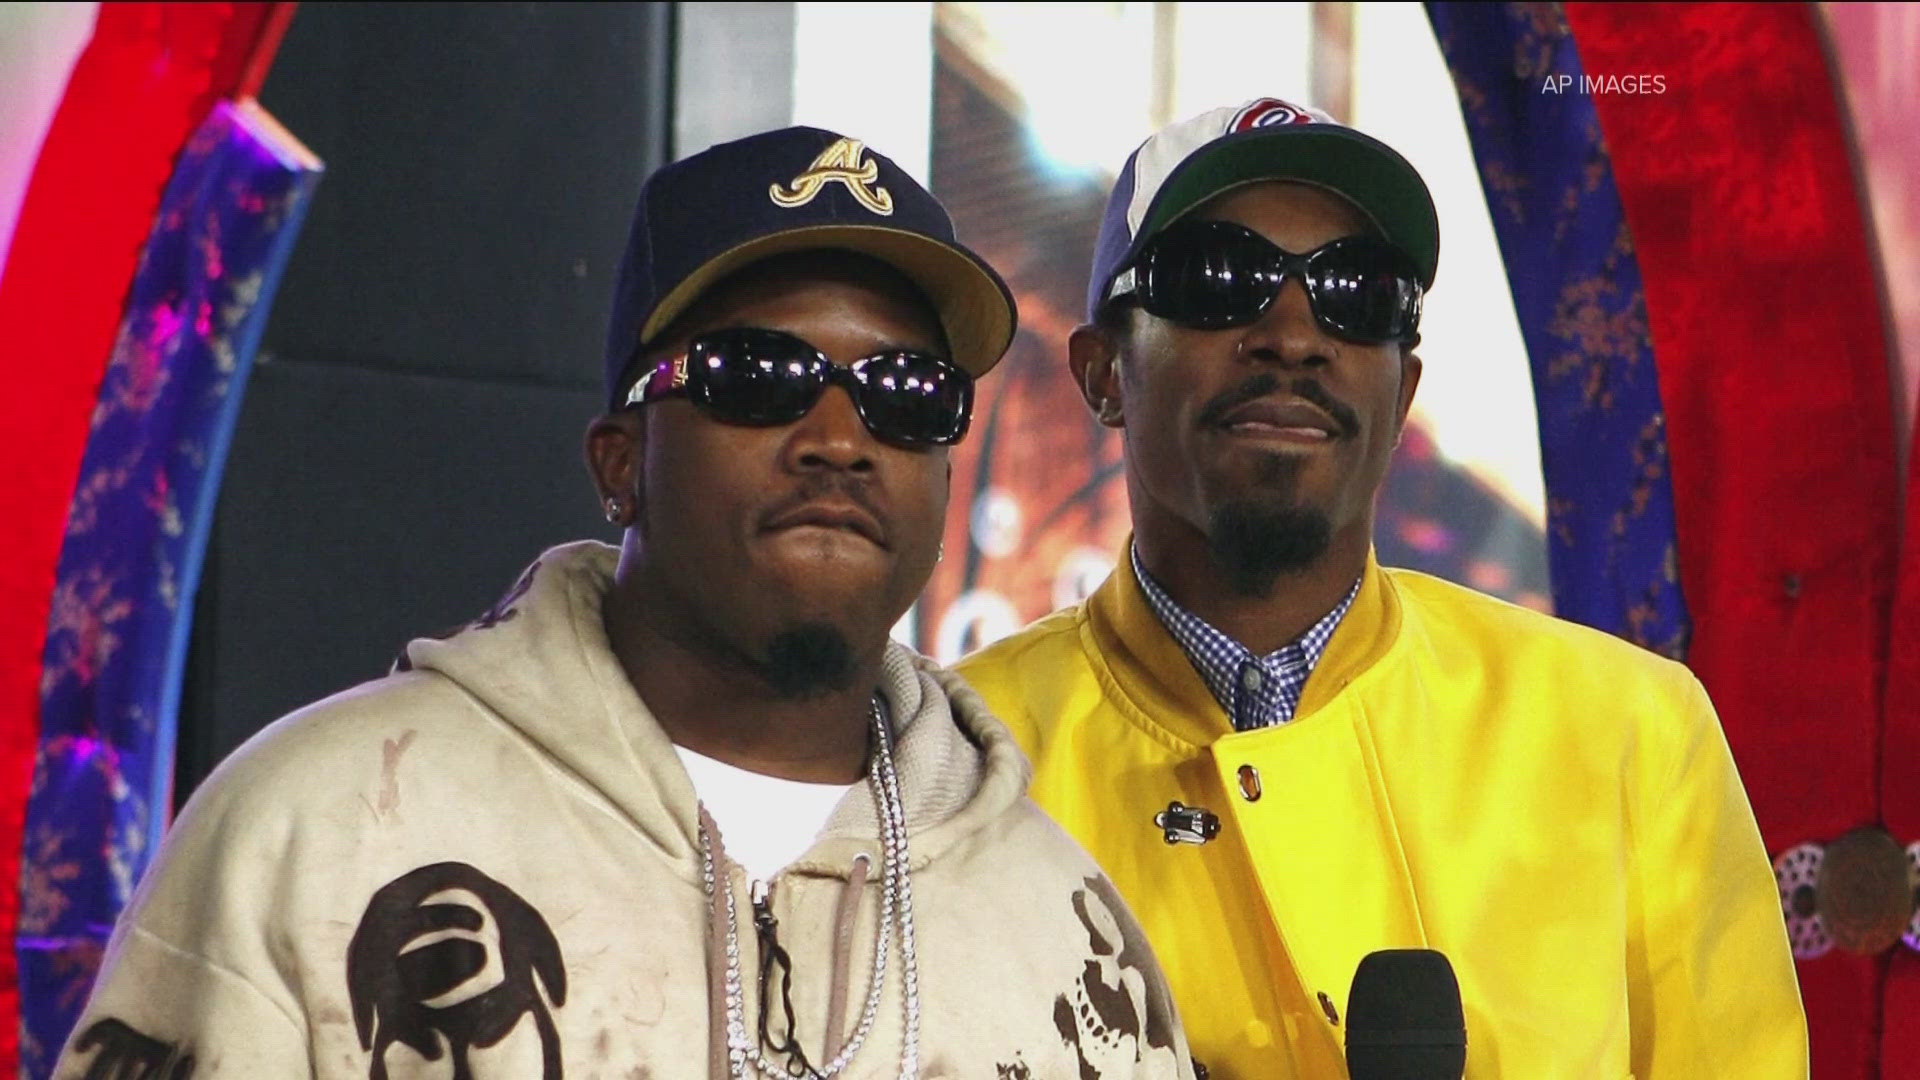 The Braves will celebrate the hip-hop duo with prizes, food, and music.